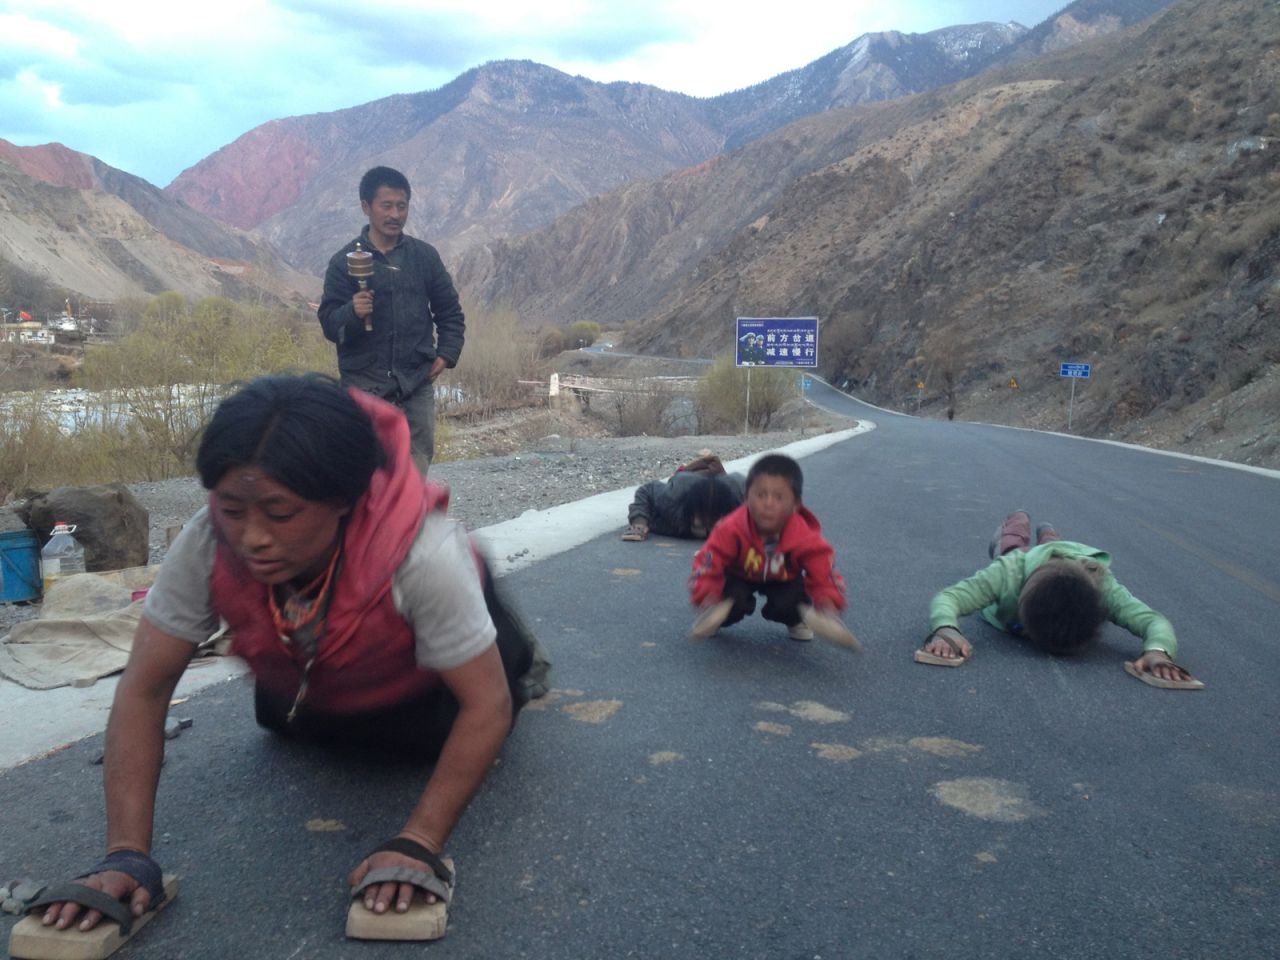 Wang encountered Tibetans performing a traditional long-distance prostration pilgrimage. Now that his bike has been stolen, Wang had vowed to finish his own journey on foot had the bike not been recovered.